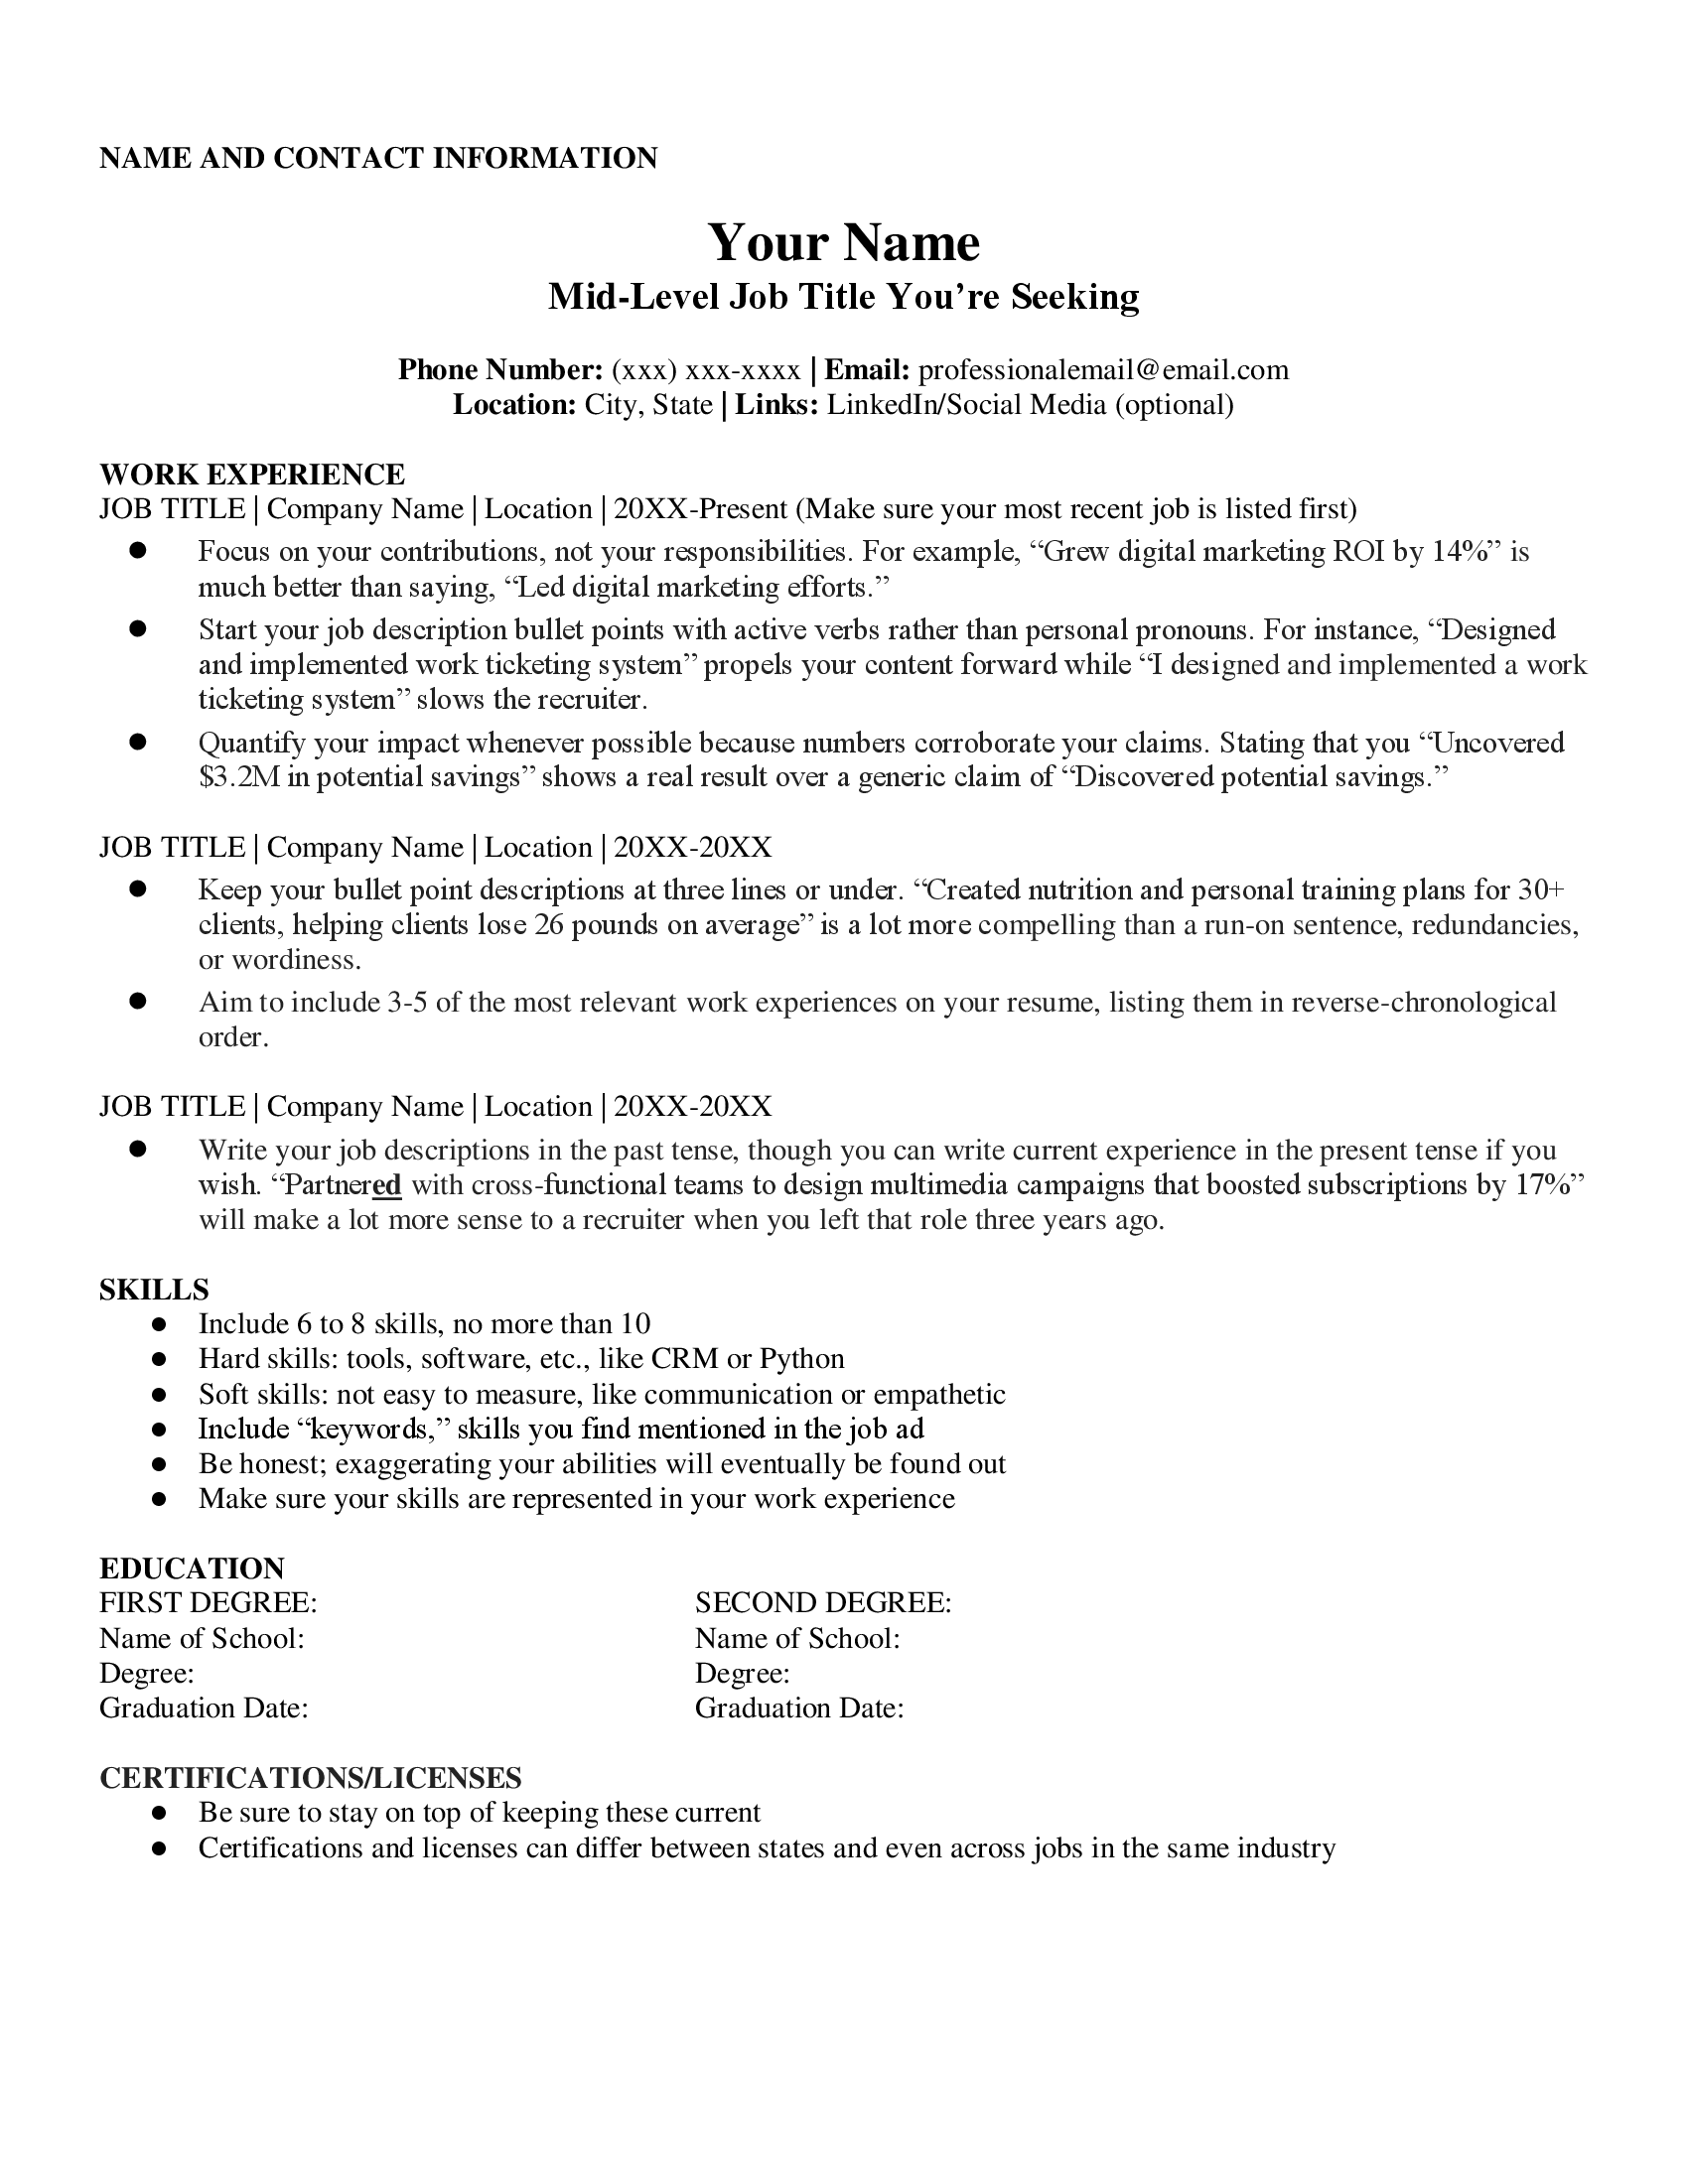 Basic resume outline example for mid-level job seekers